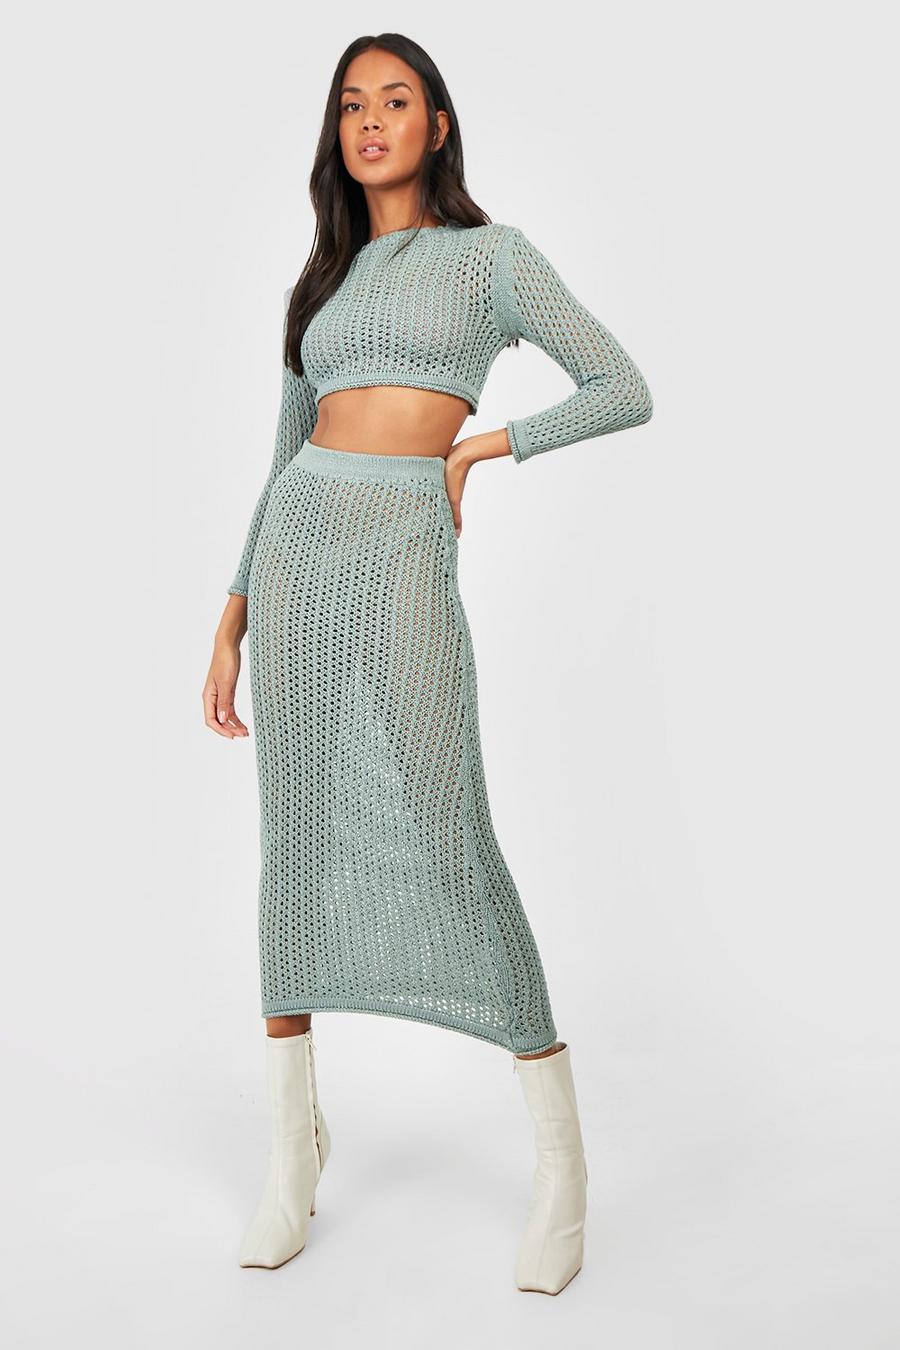 Teal Crochet Maxi Skirt Two-Piece image number 1